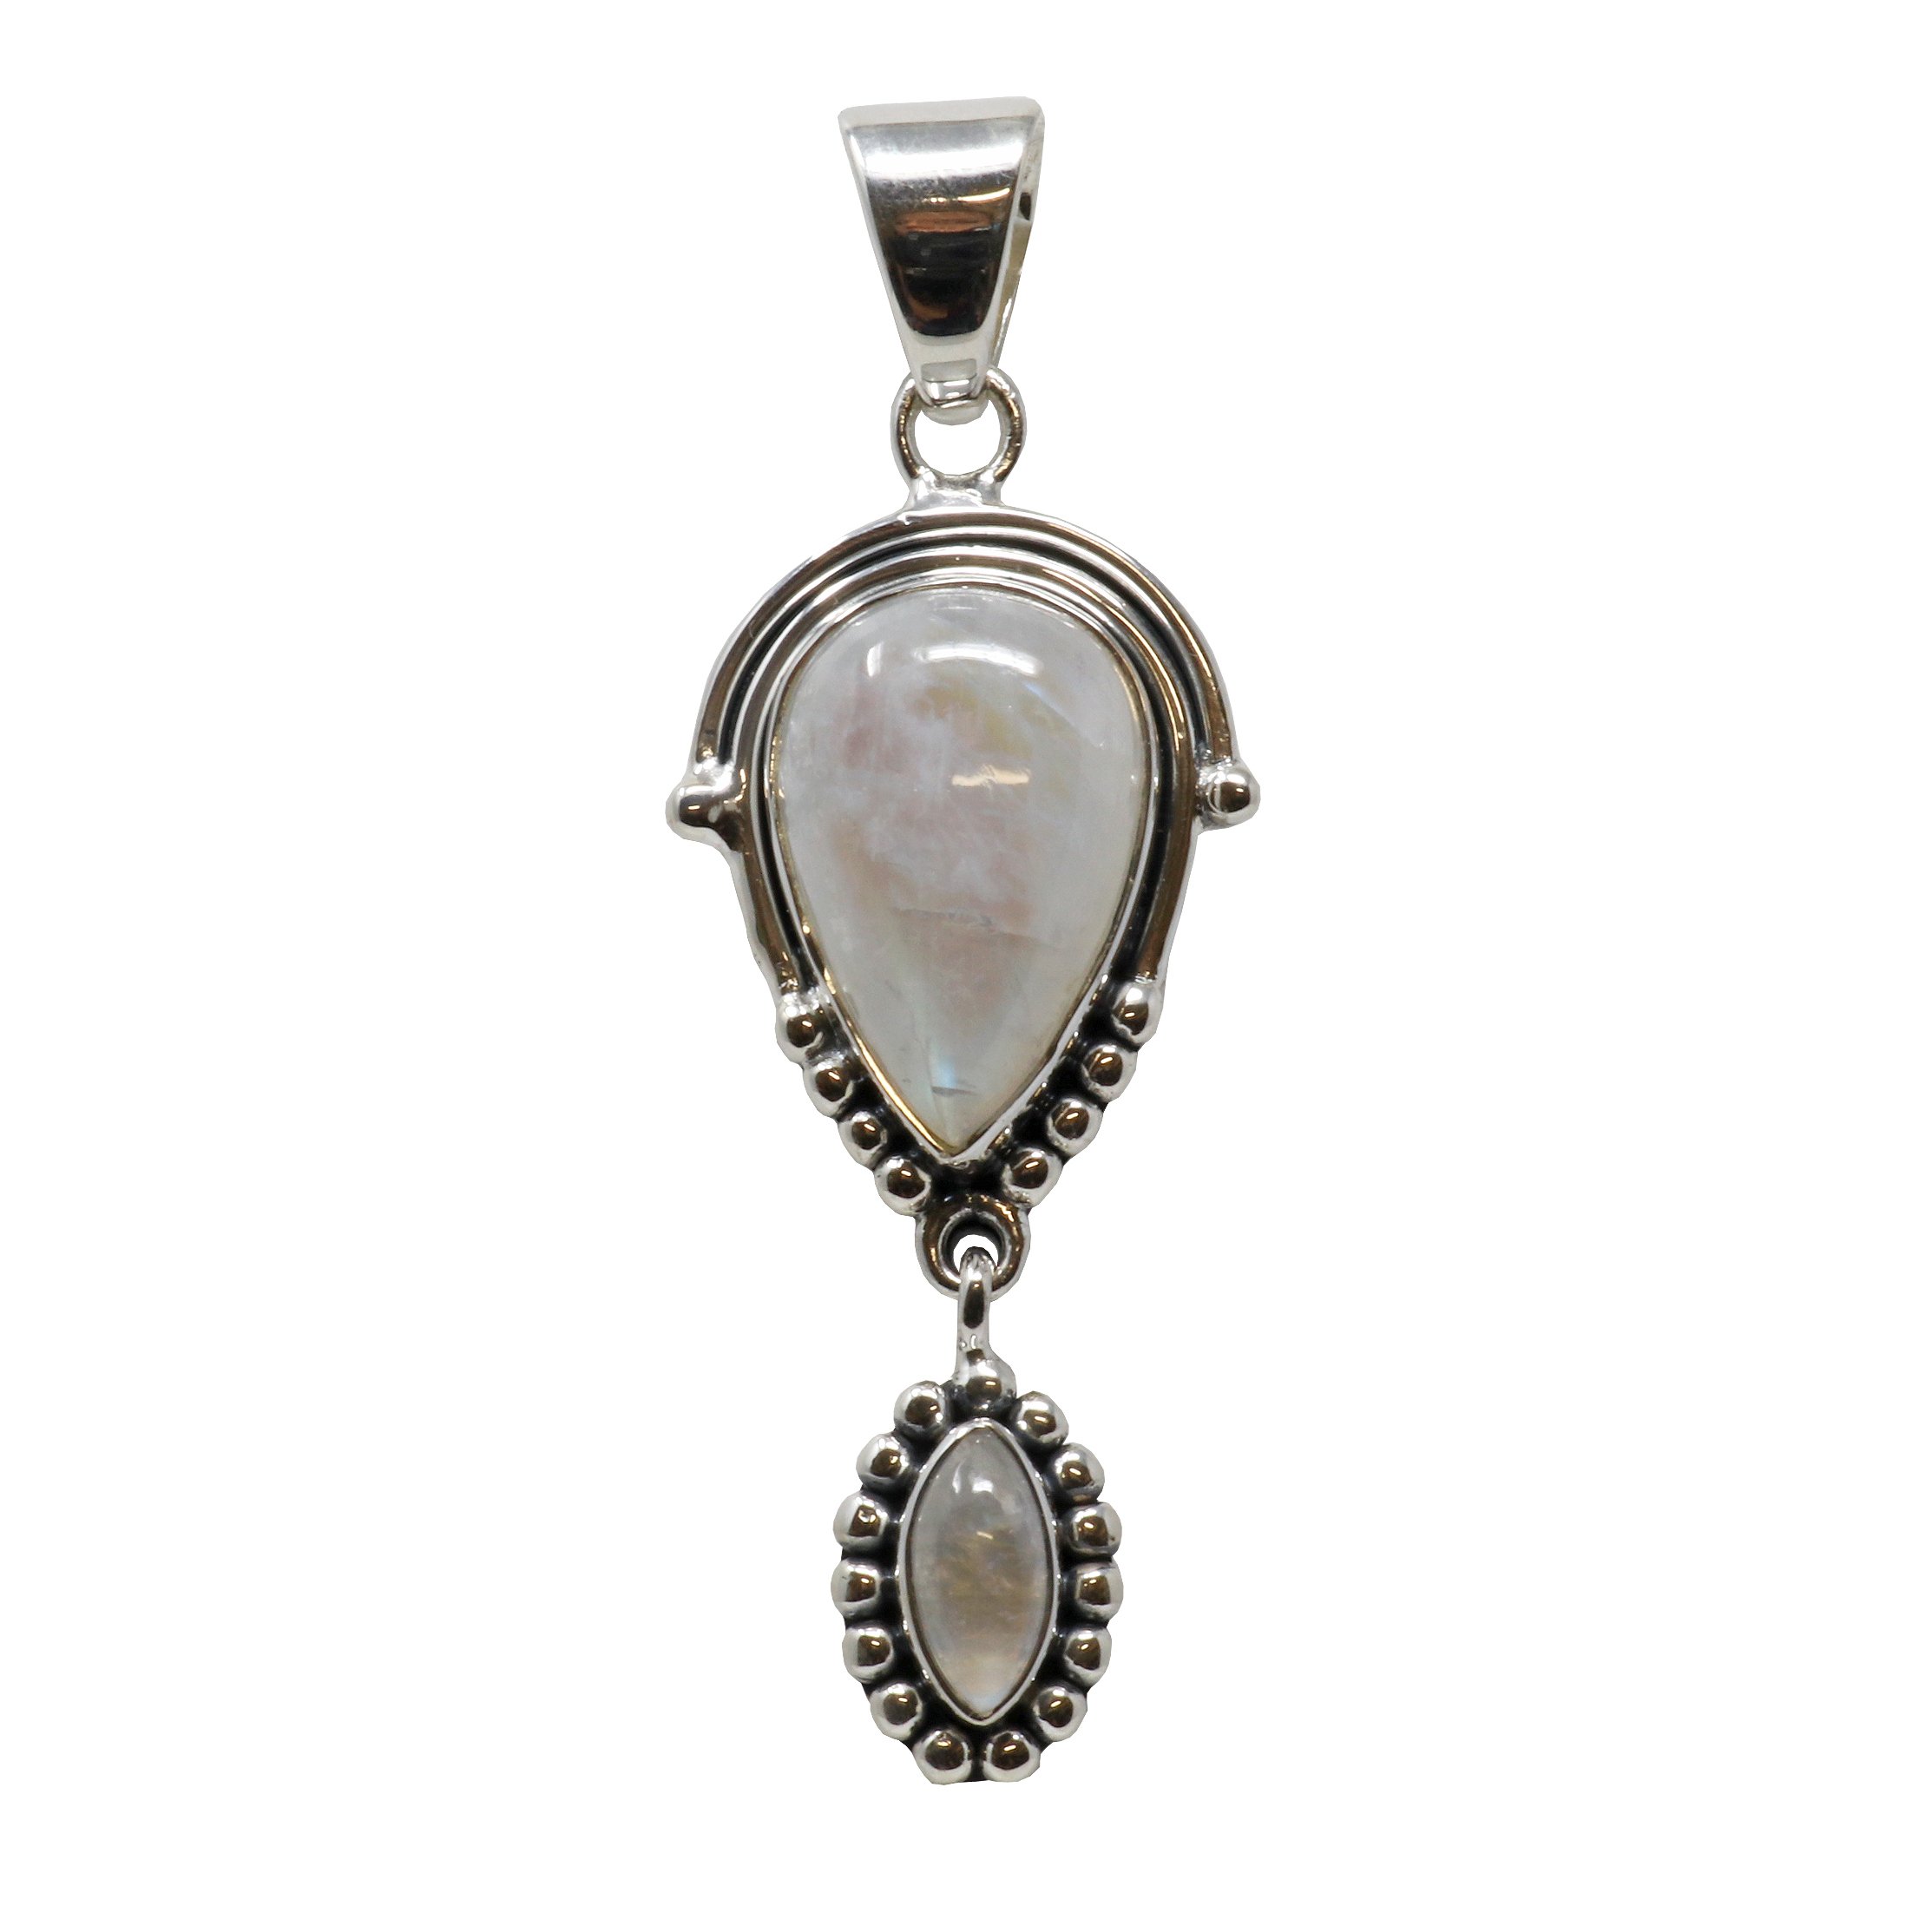 Rainbow Moonstone Pendant - Reverse Pear With Studded Bezel With Sharp Oval